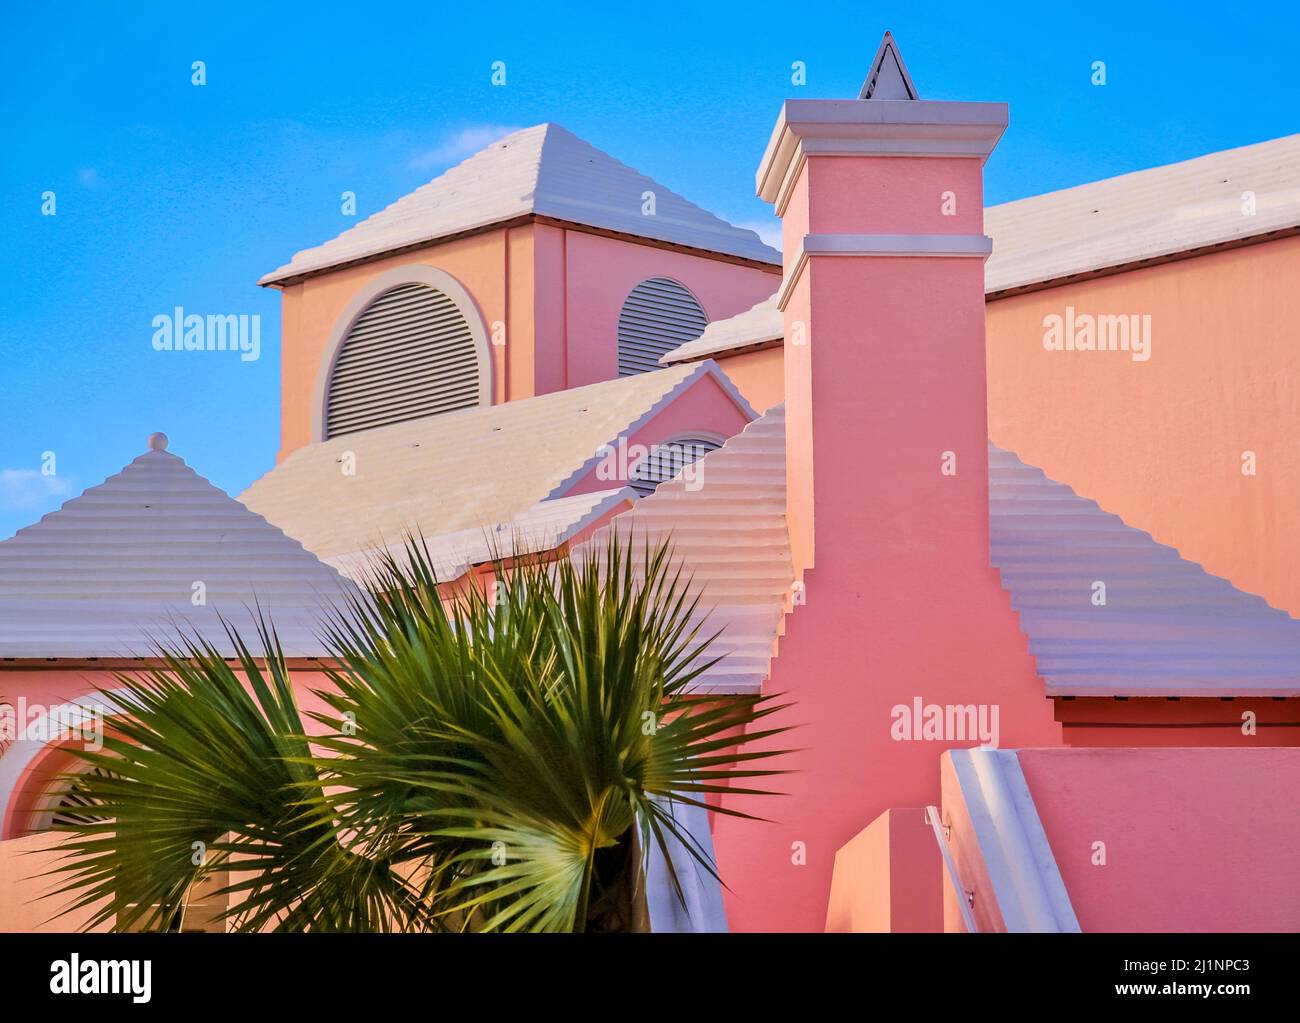 Bermuda - Traditional architecture with a modern twist Stock Photo